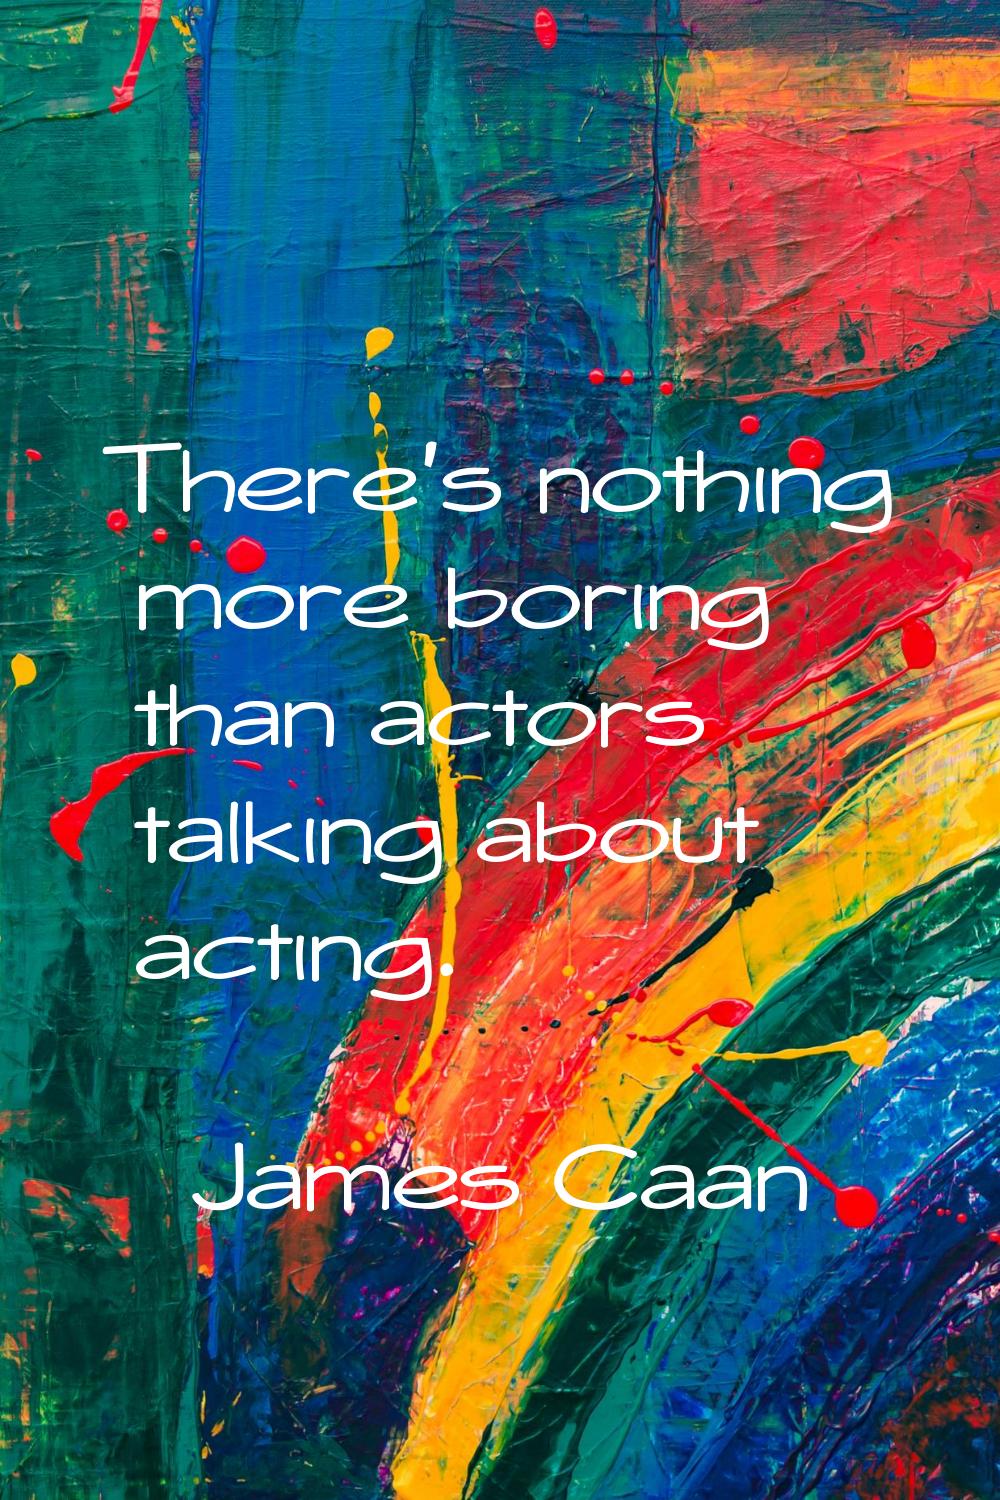 There's nothing more boring than actors talking about acting.